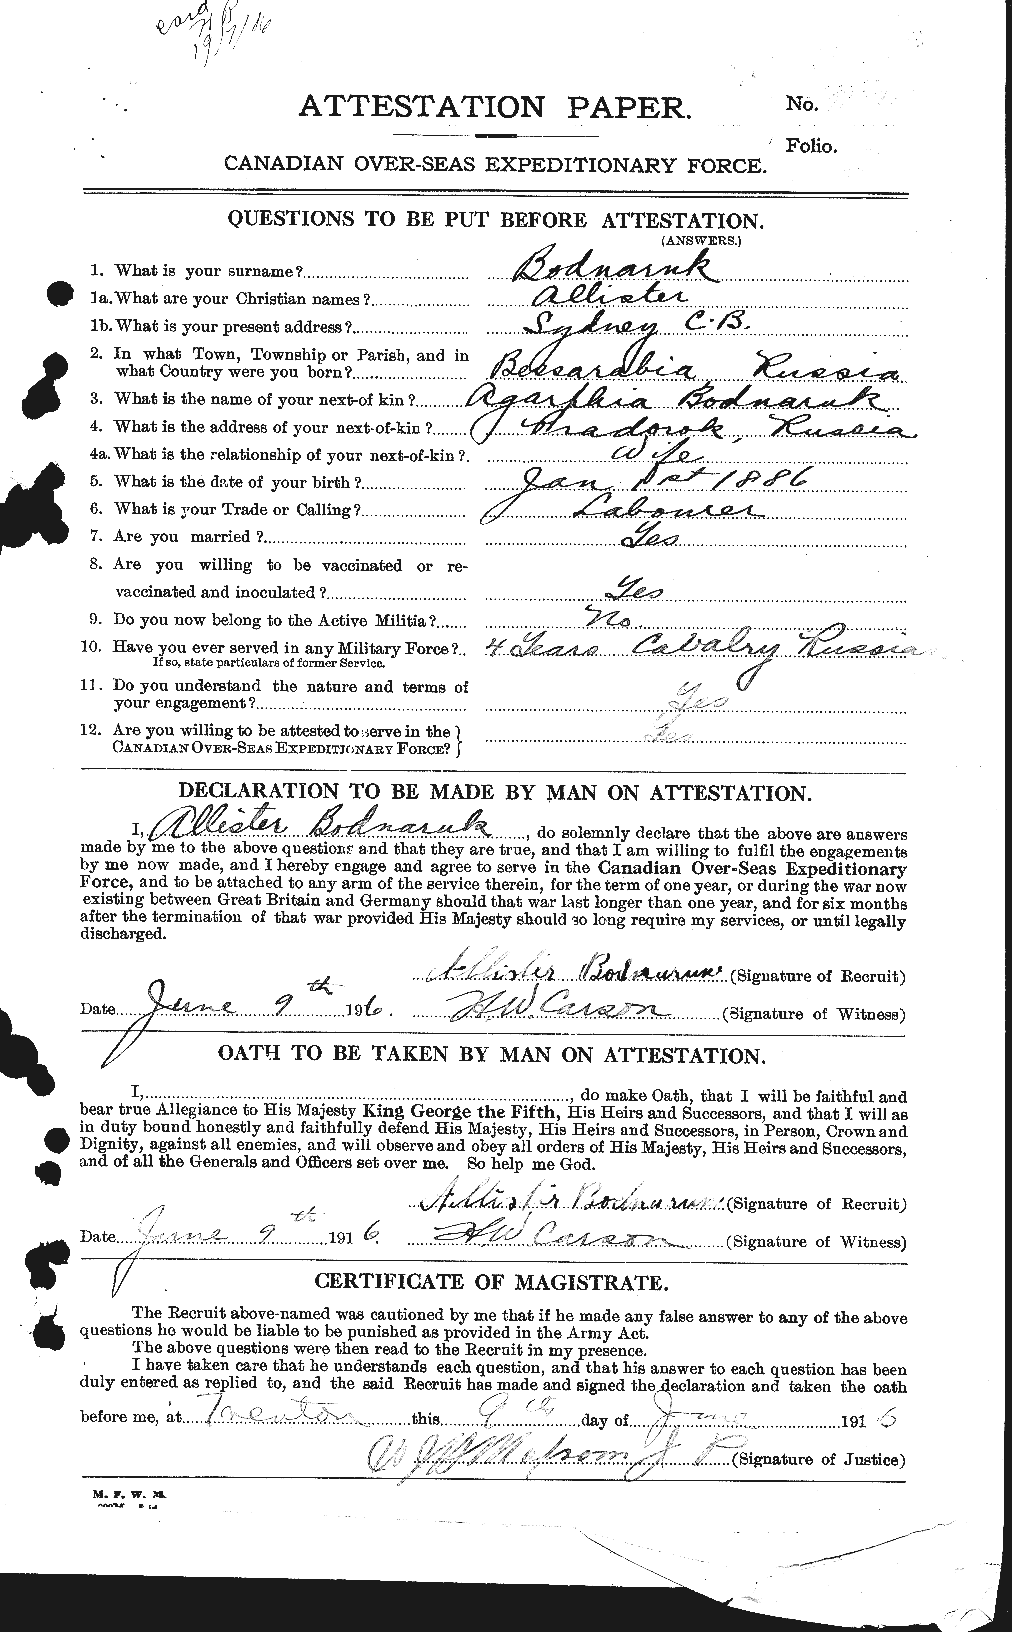 Personnel Records of the First World War - CEF 245133a